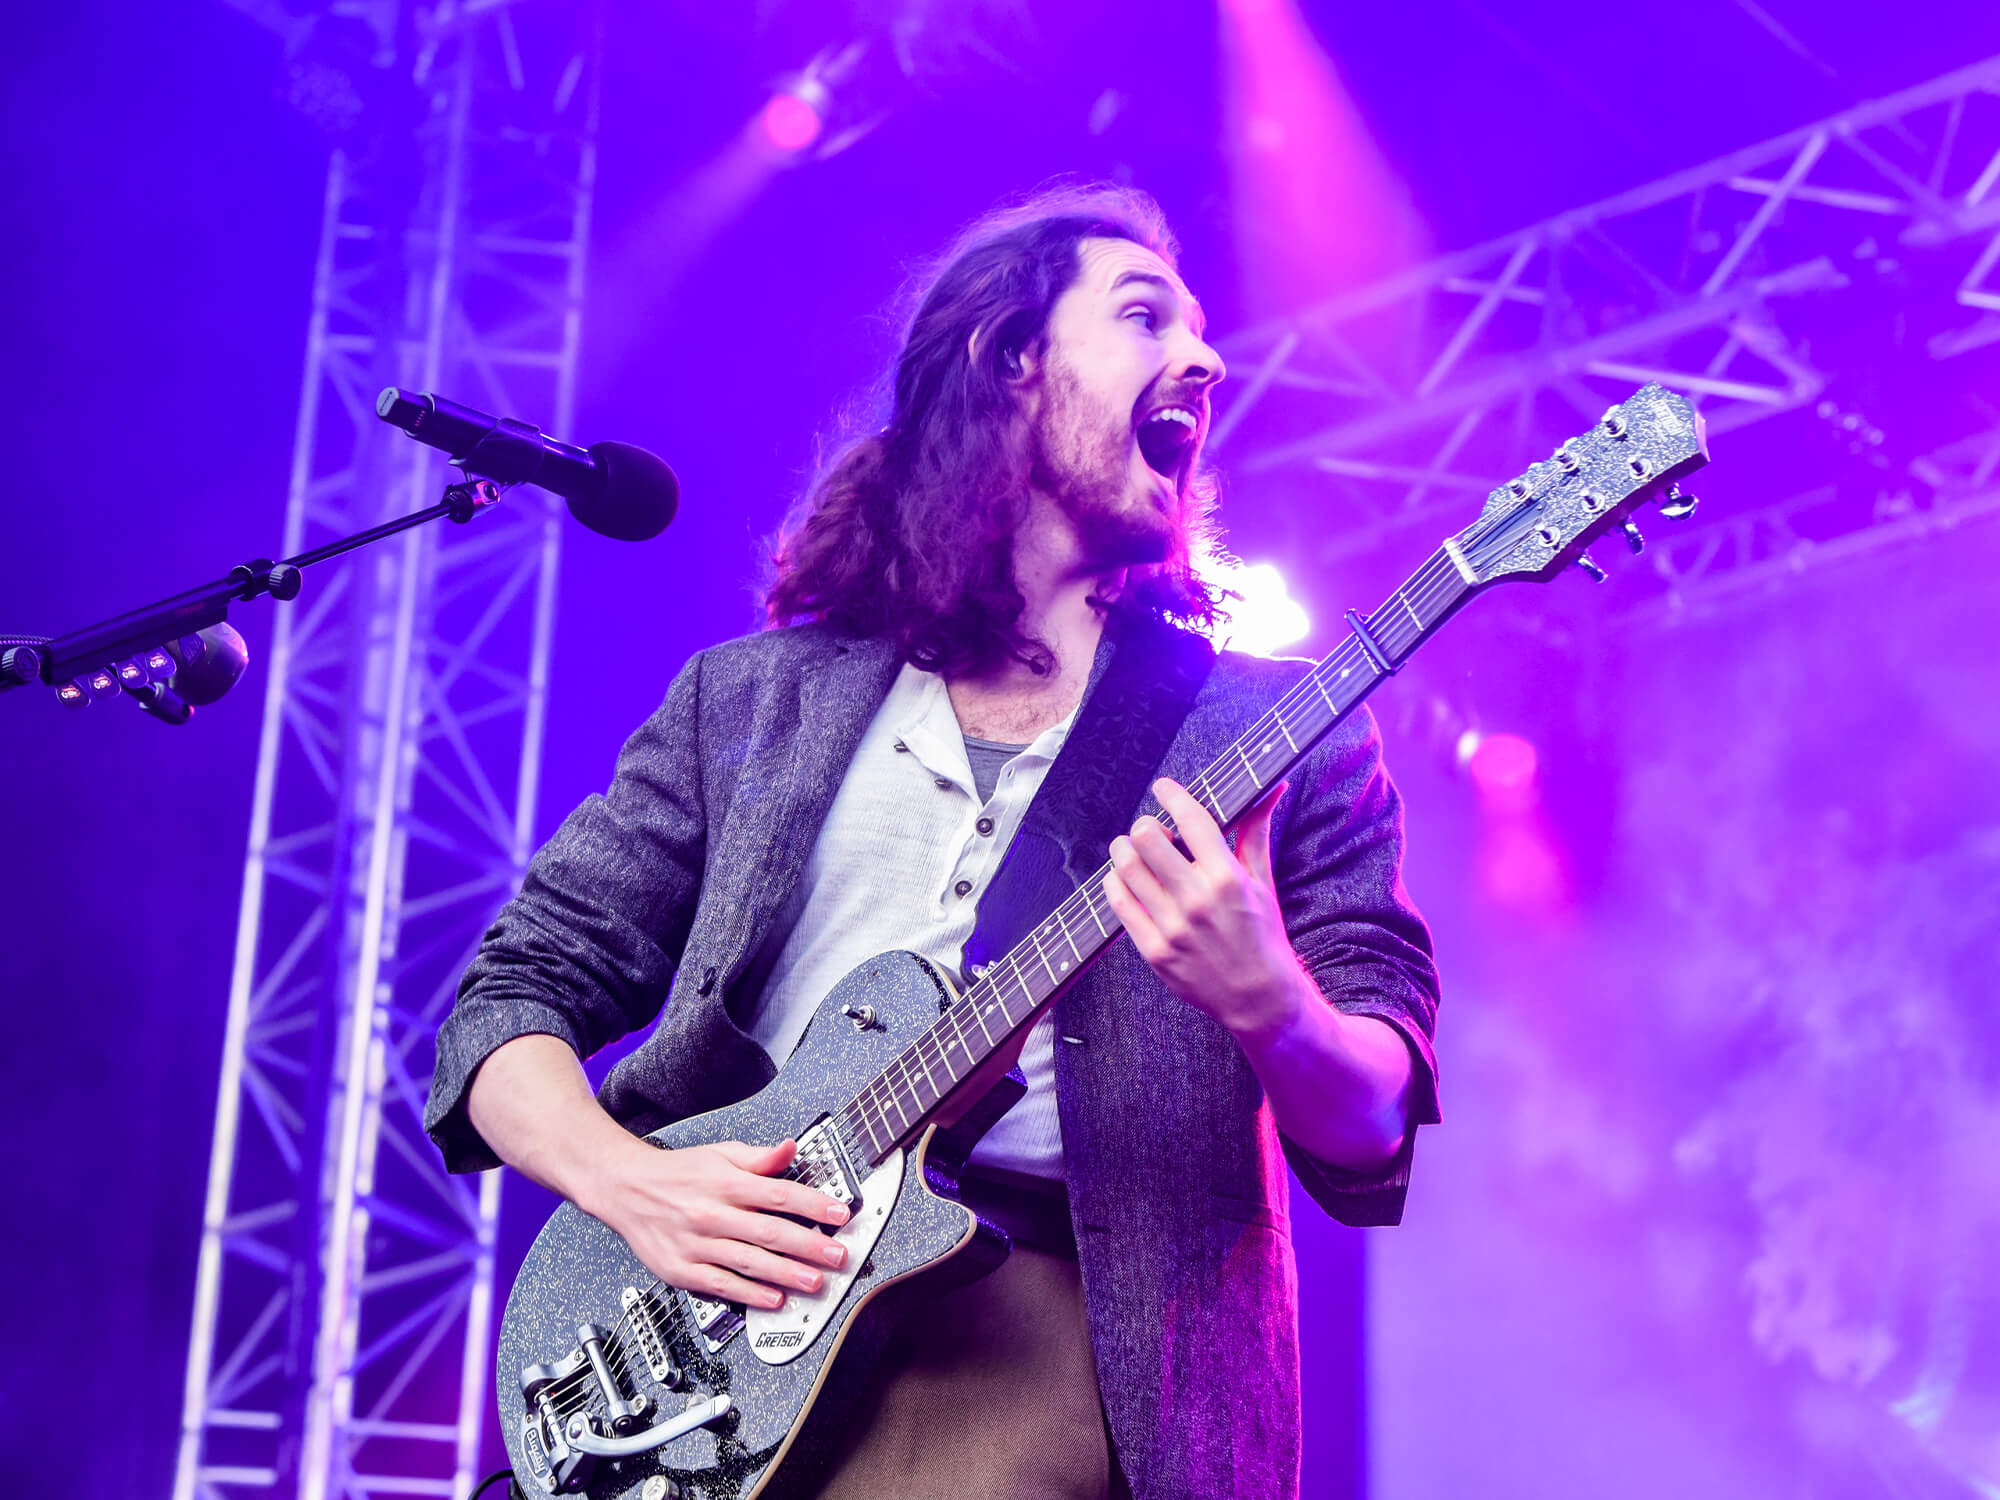 Hozier playing a black sparkle Gretsch guitar on stage. He's smiling and stands on stage amongst purple lighting